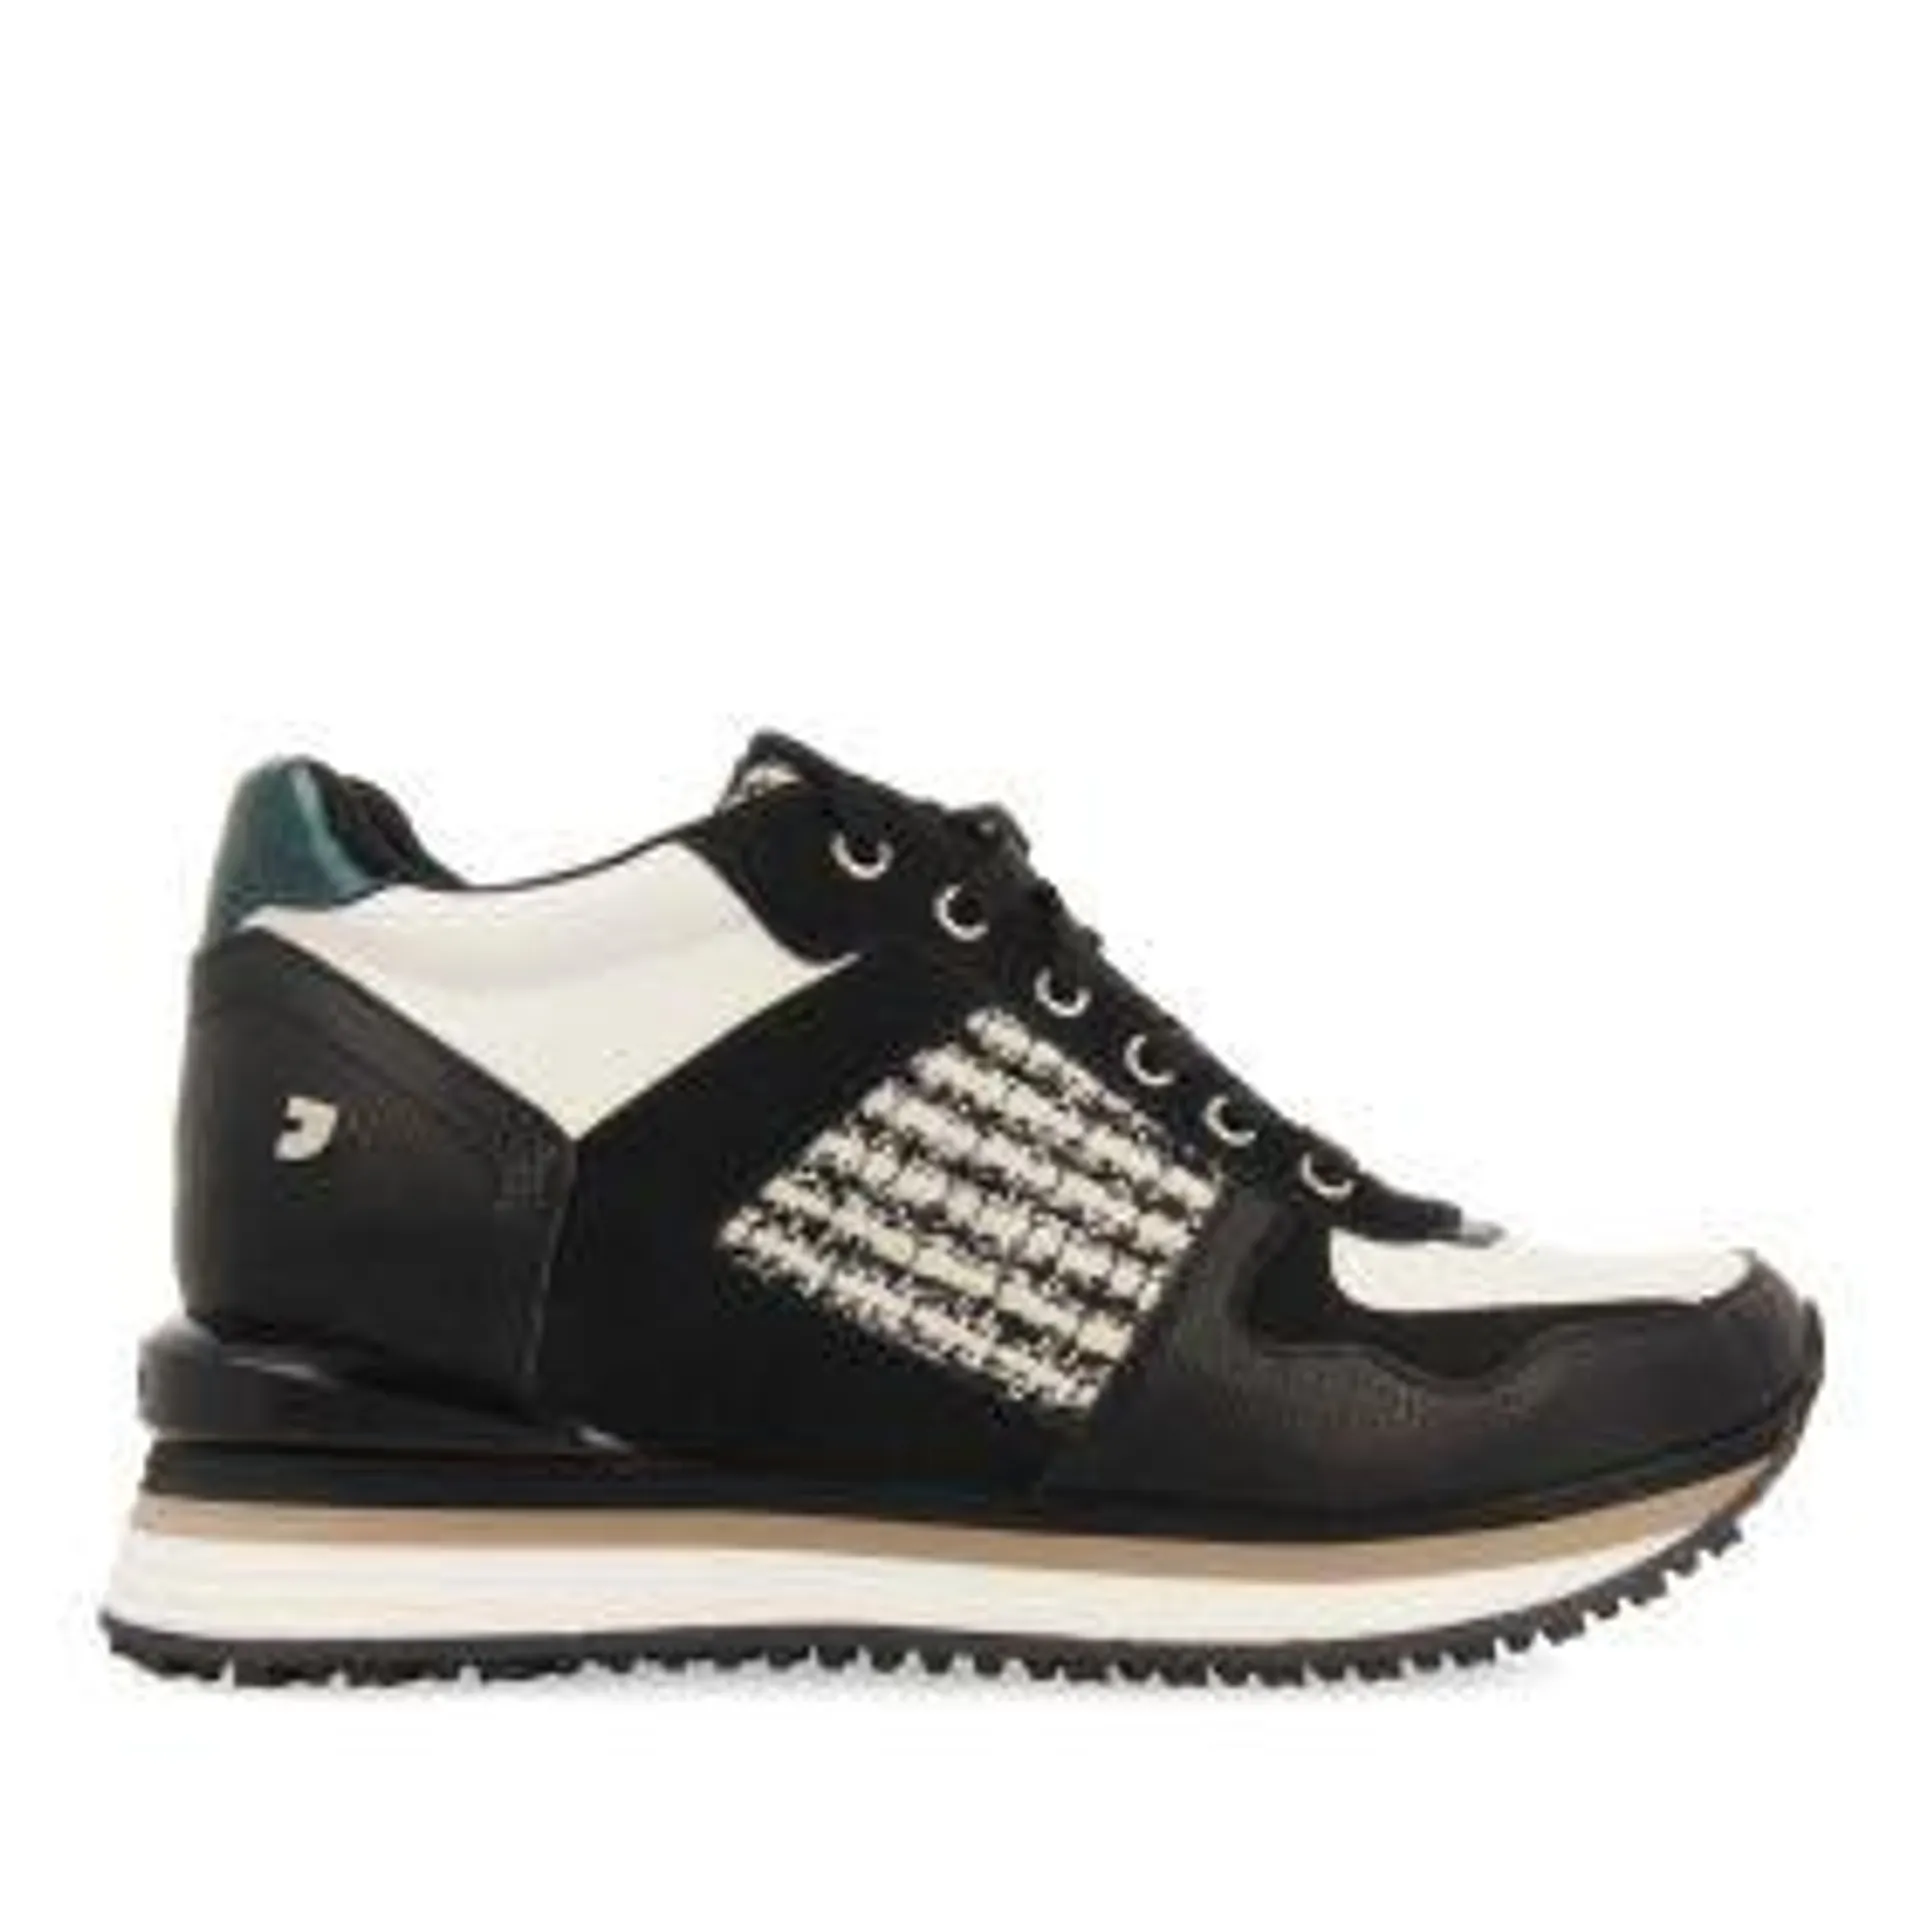 Dillingen women's black sneakers with inner wedges and pieces in black, white, green and shiny fabric